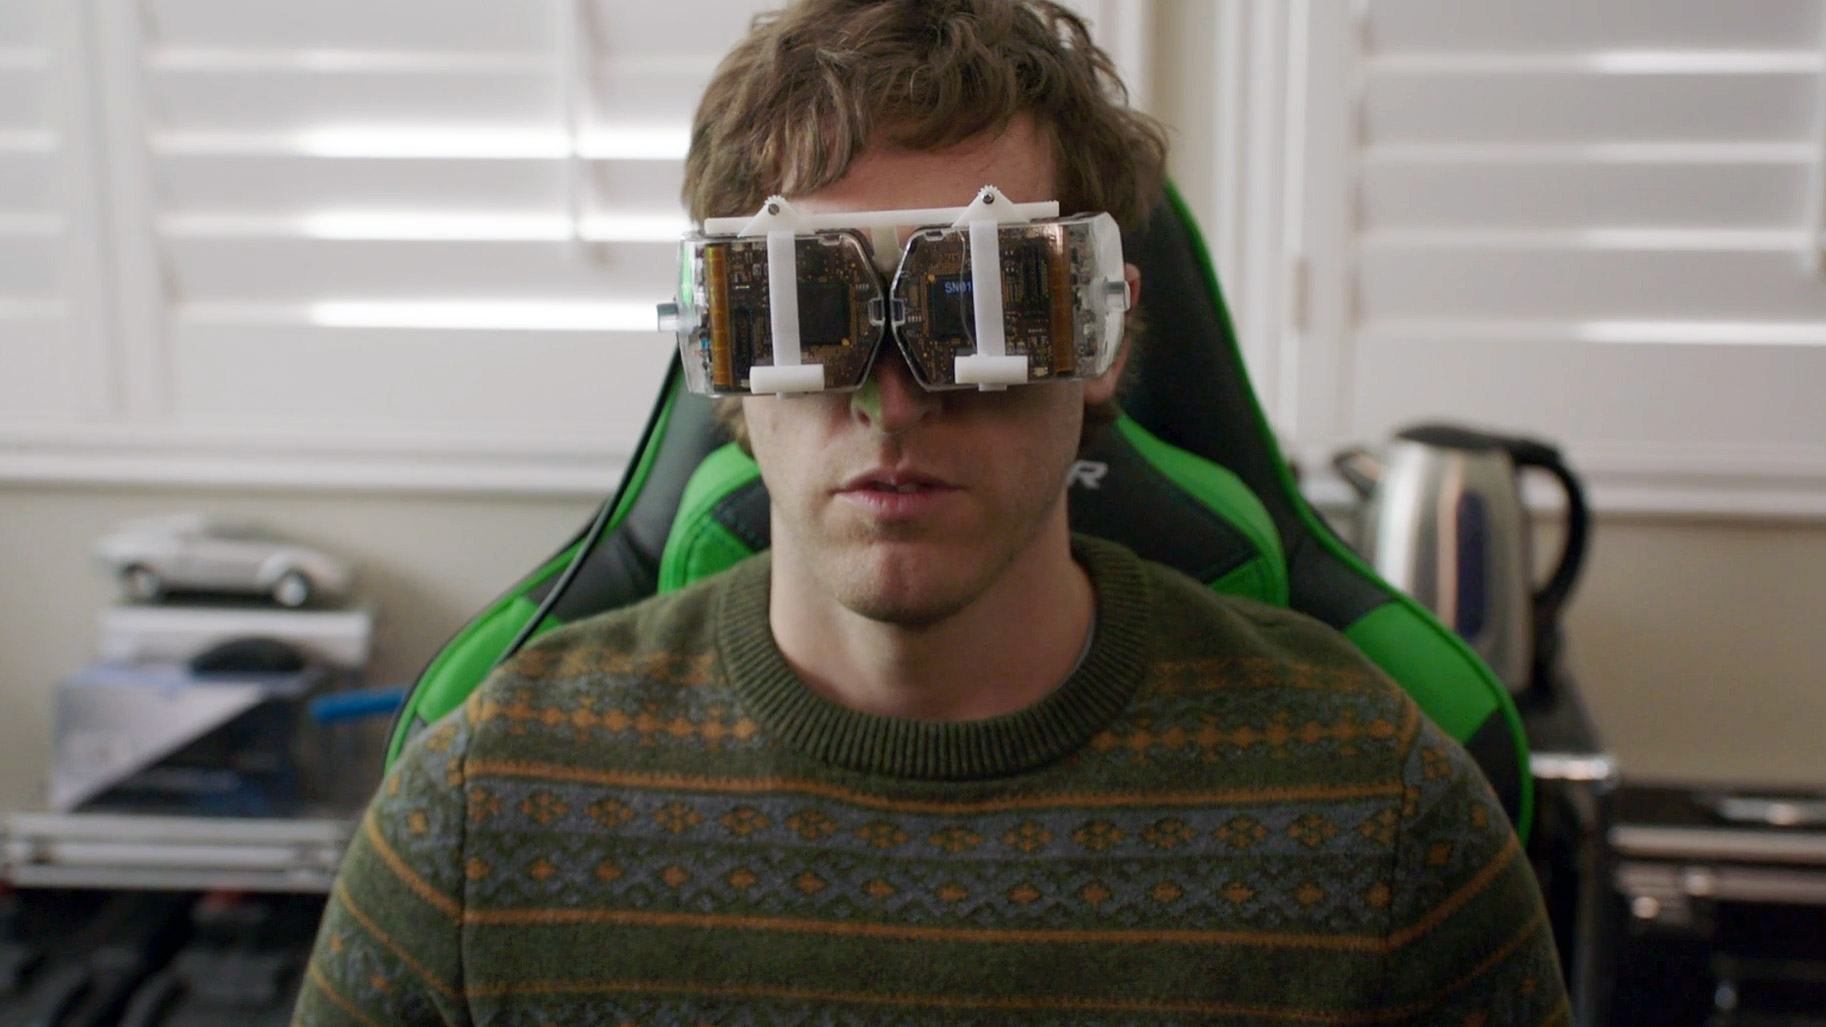 The VR in HBO's 'Silicon Valley' Are Not Prop but a Real Prototype – Road to